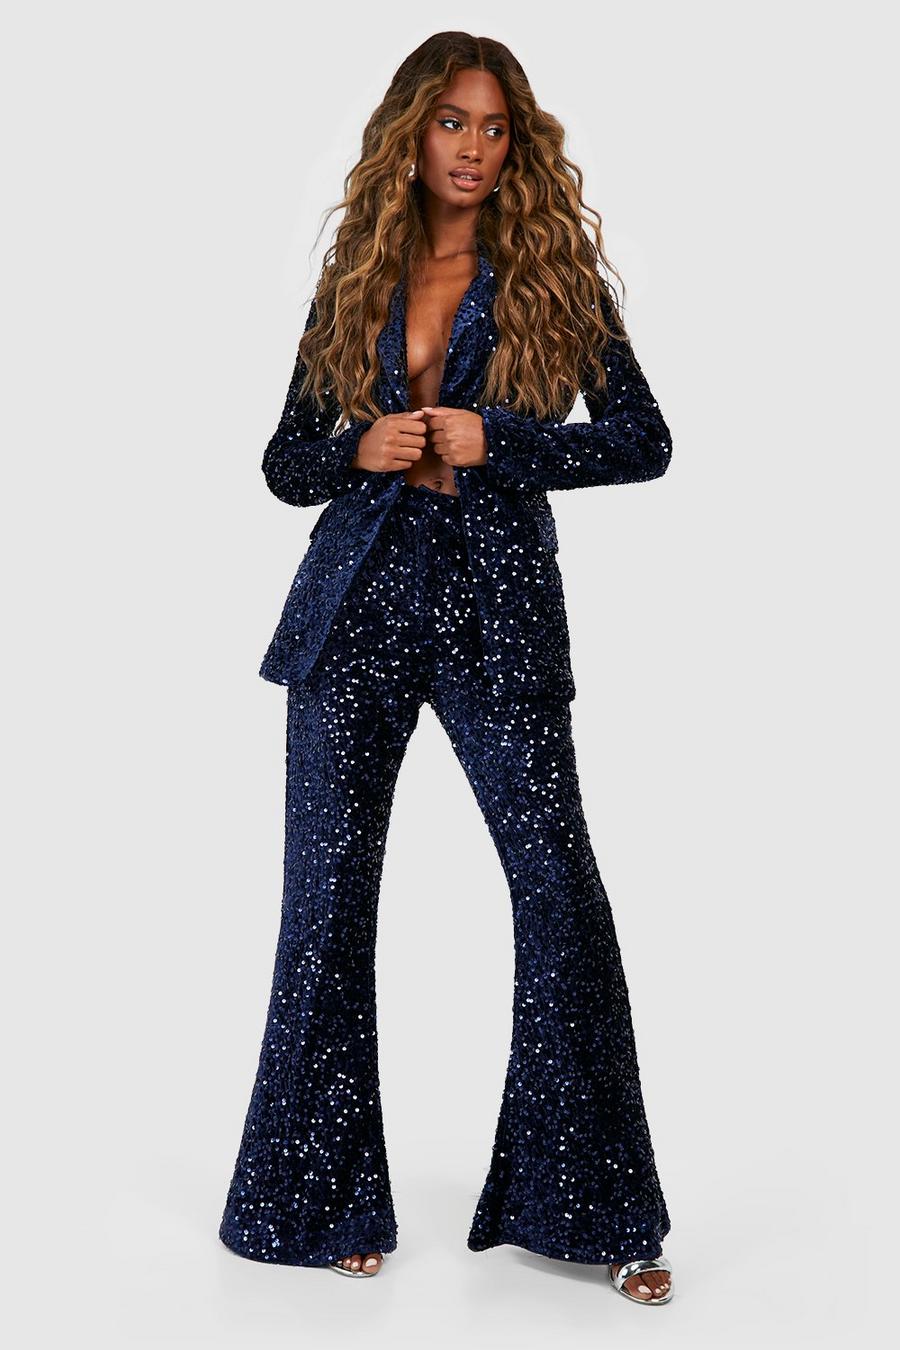 Pantaloni sartoriali Fit & Flare in velluto con paillettes, Midnight image number 1